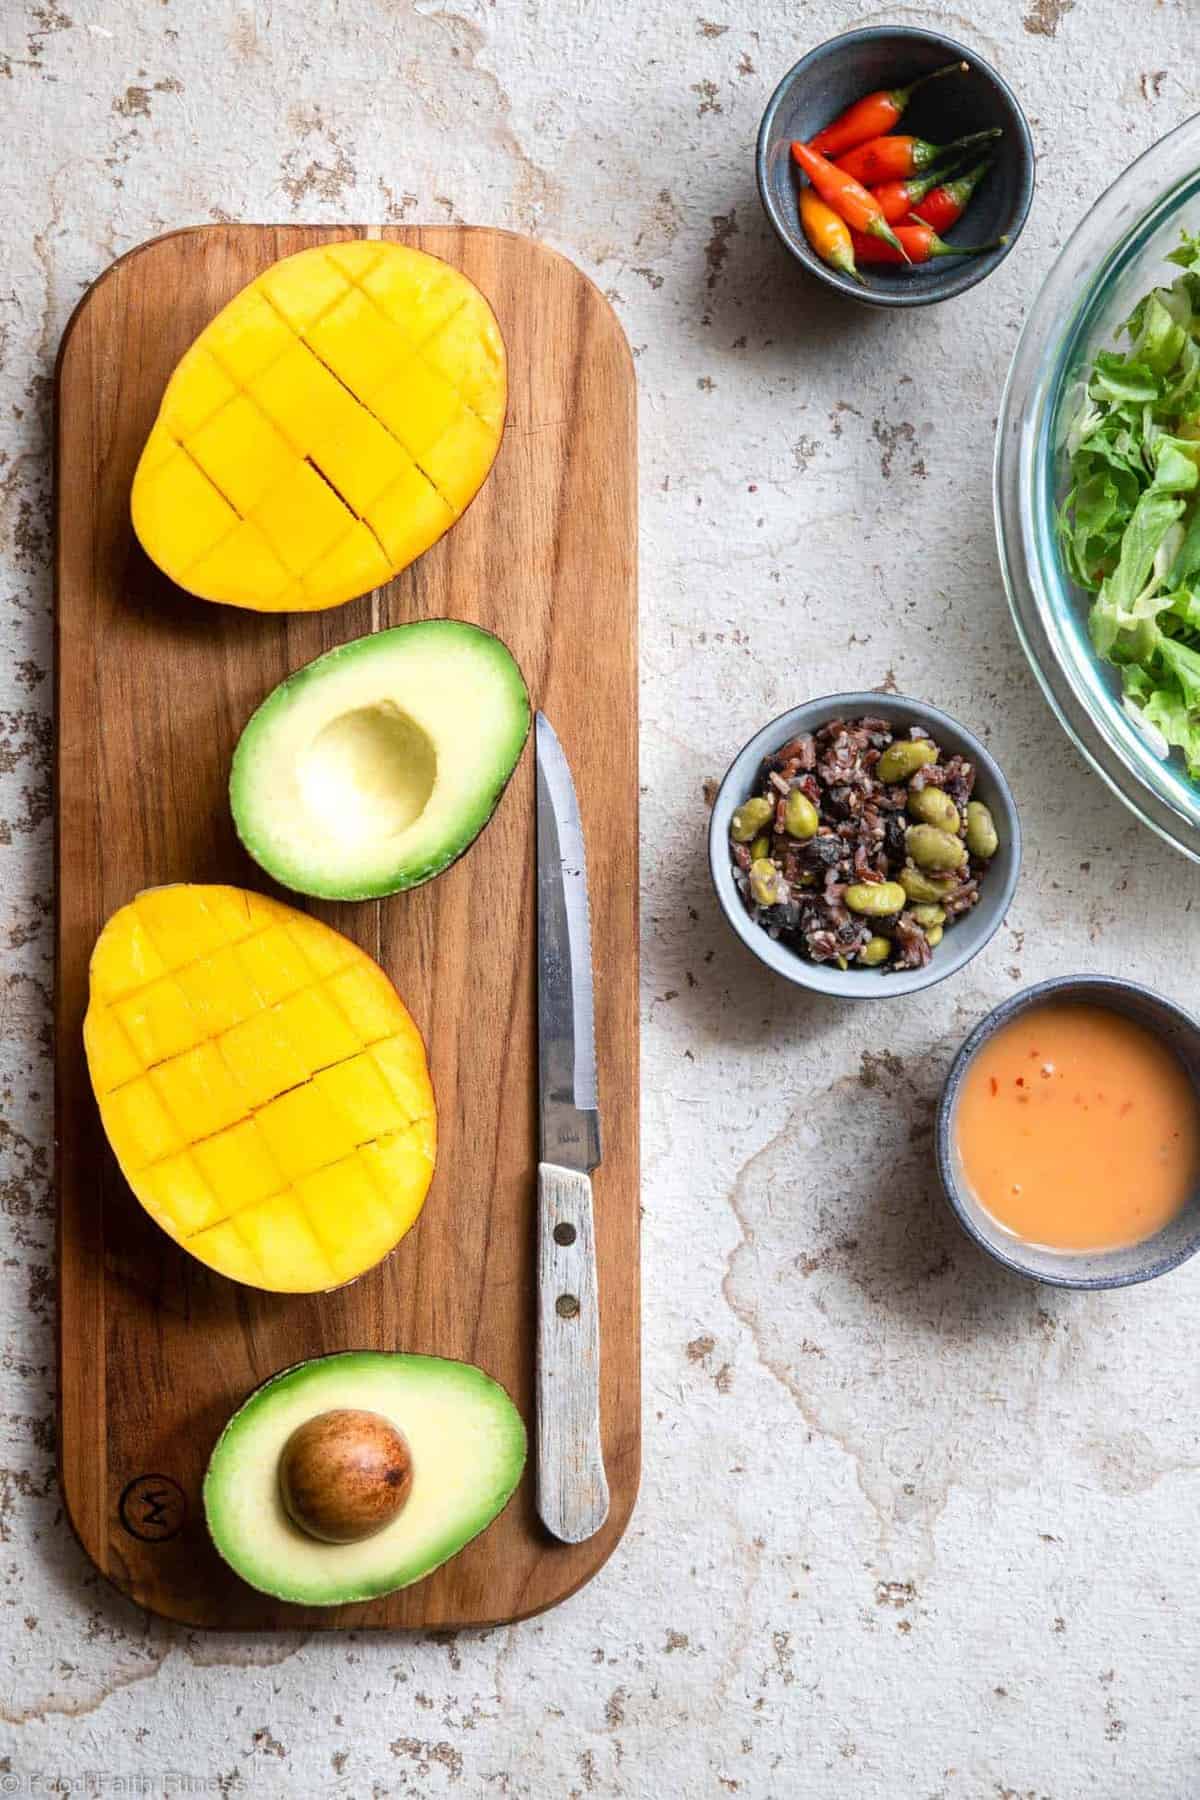 Mangoes and avocado on a cutting board to make Thai beef salad recipe